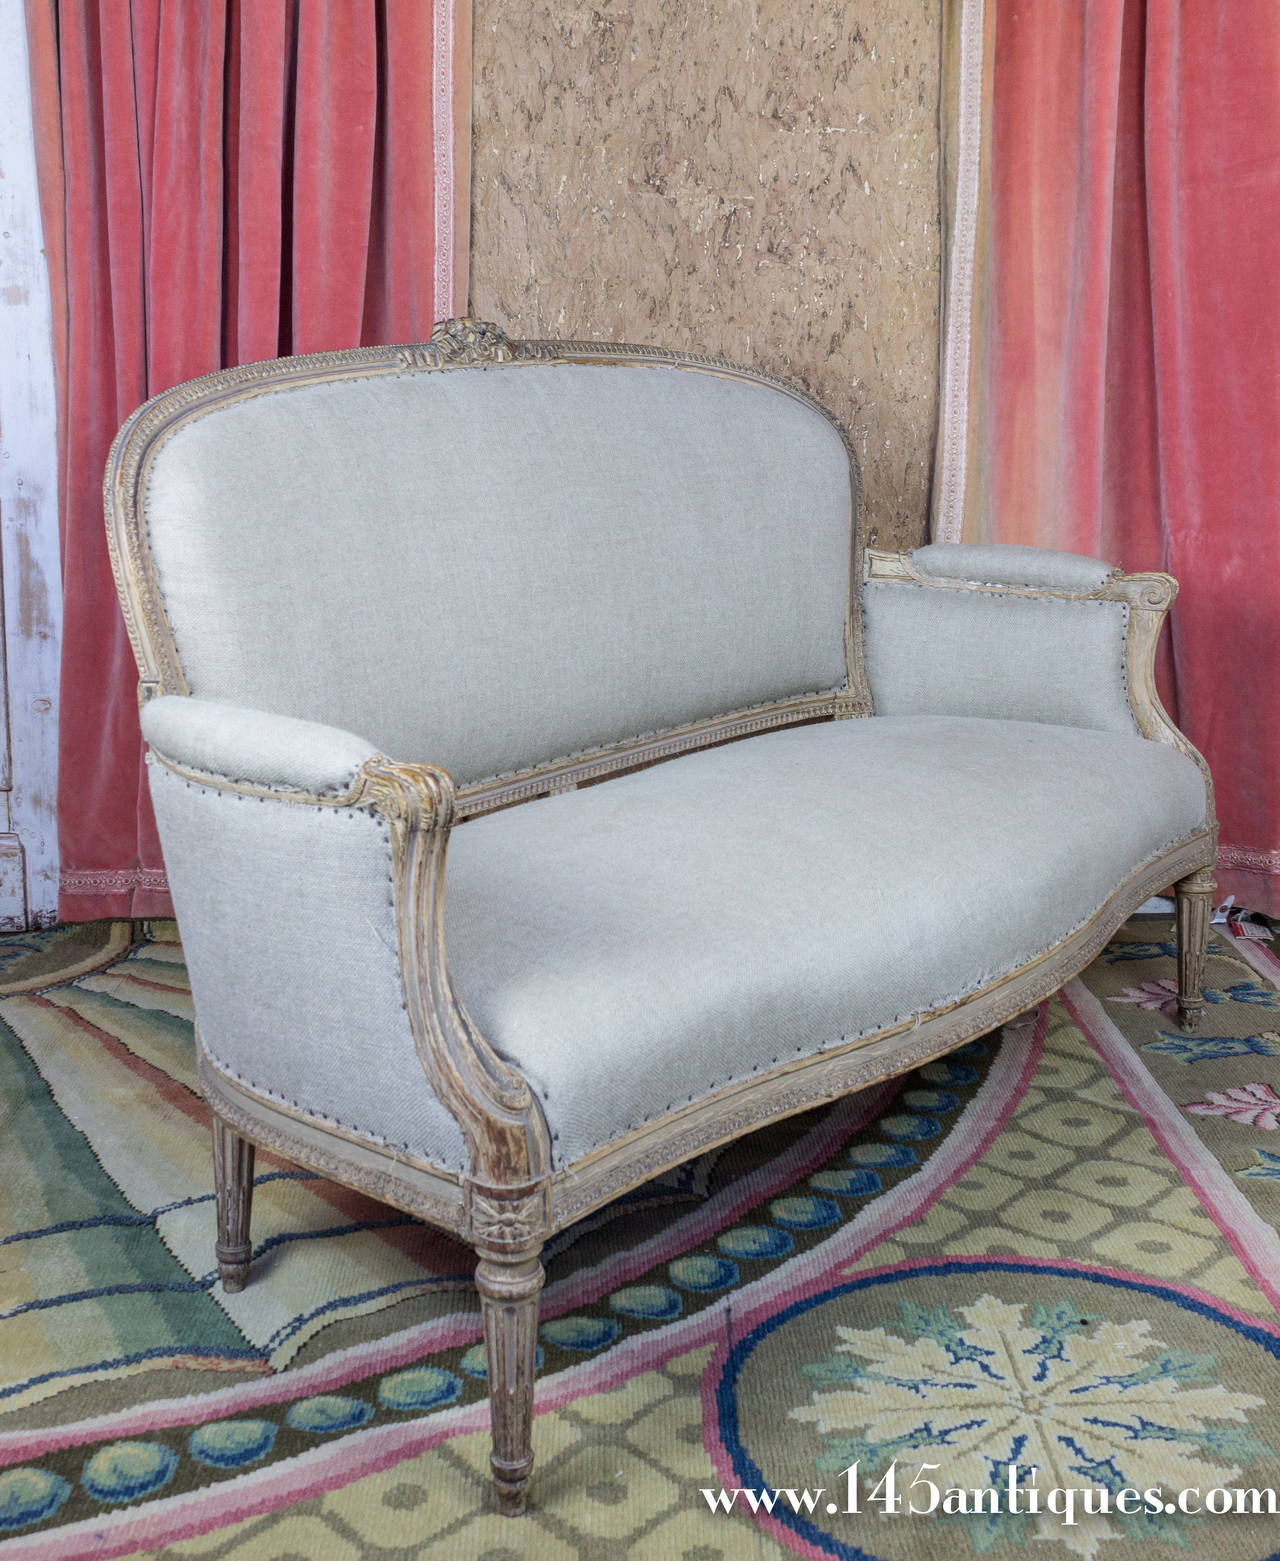 A Stunning French 19th Century Louis XVI Style Settee. Sold as is.